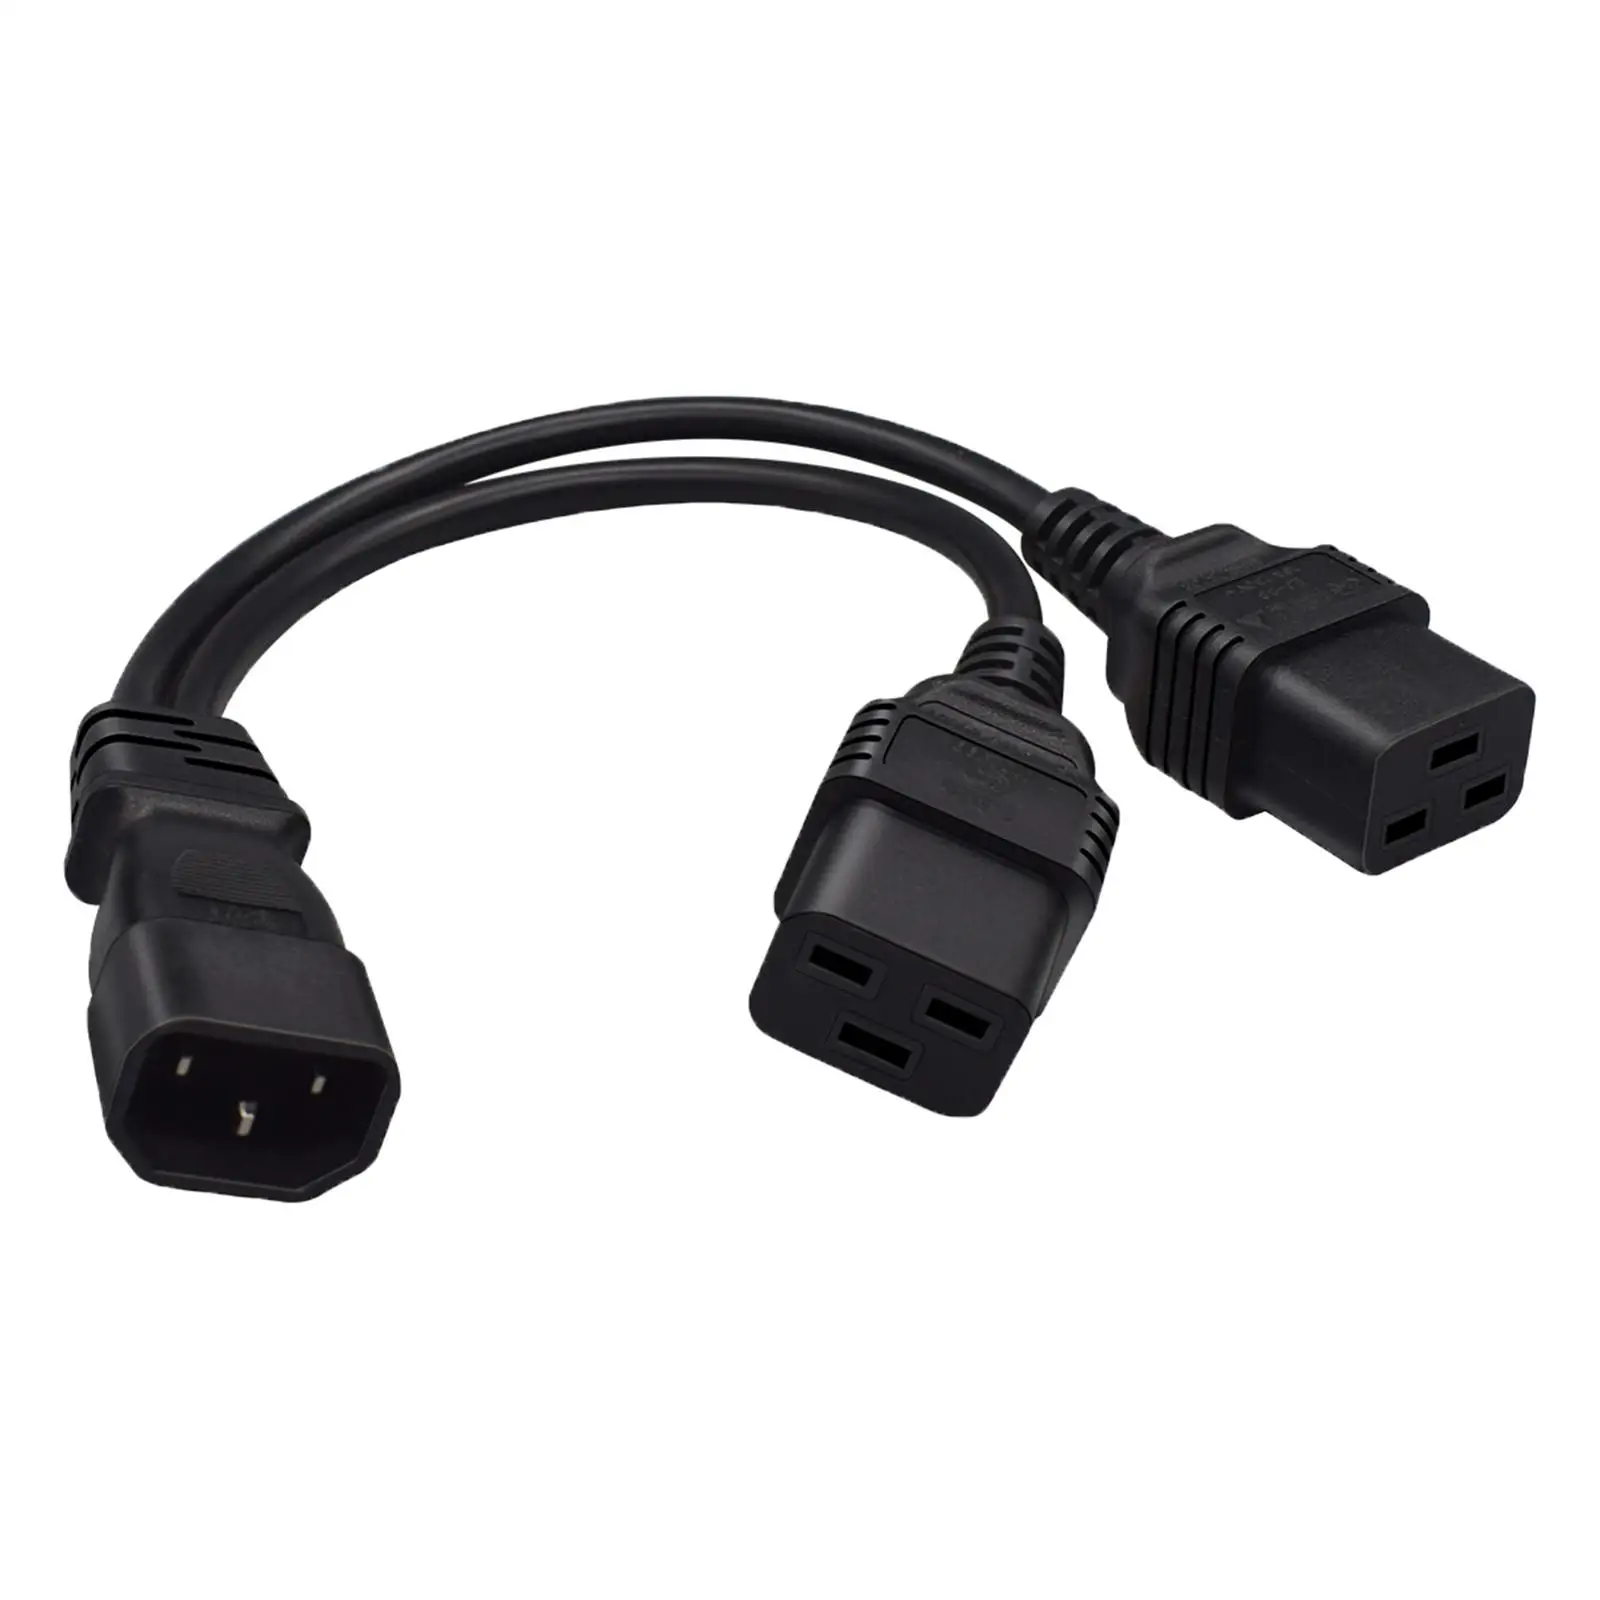 IEC320 C14 to IEC320 C19 Y Splitter Convertor 30cm Cord Extension Pdu Ups Cord Splitter for PC Monitor Scanner